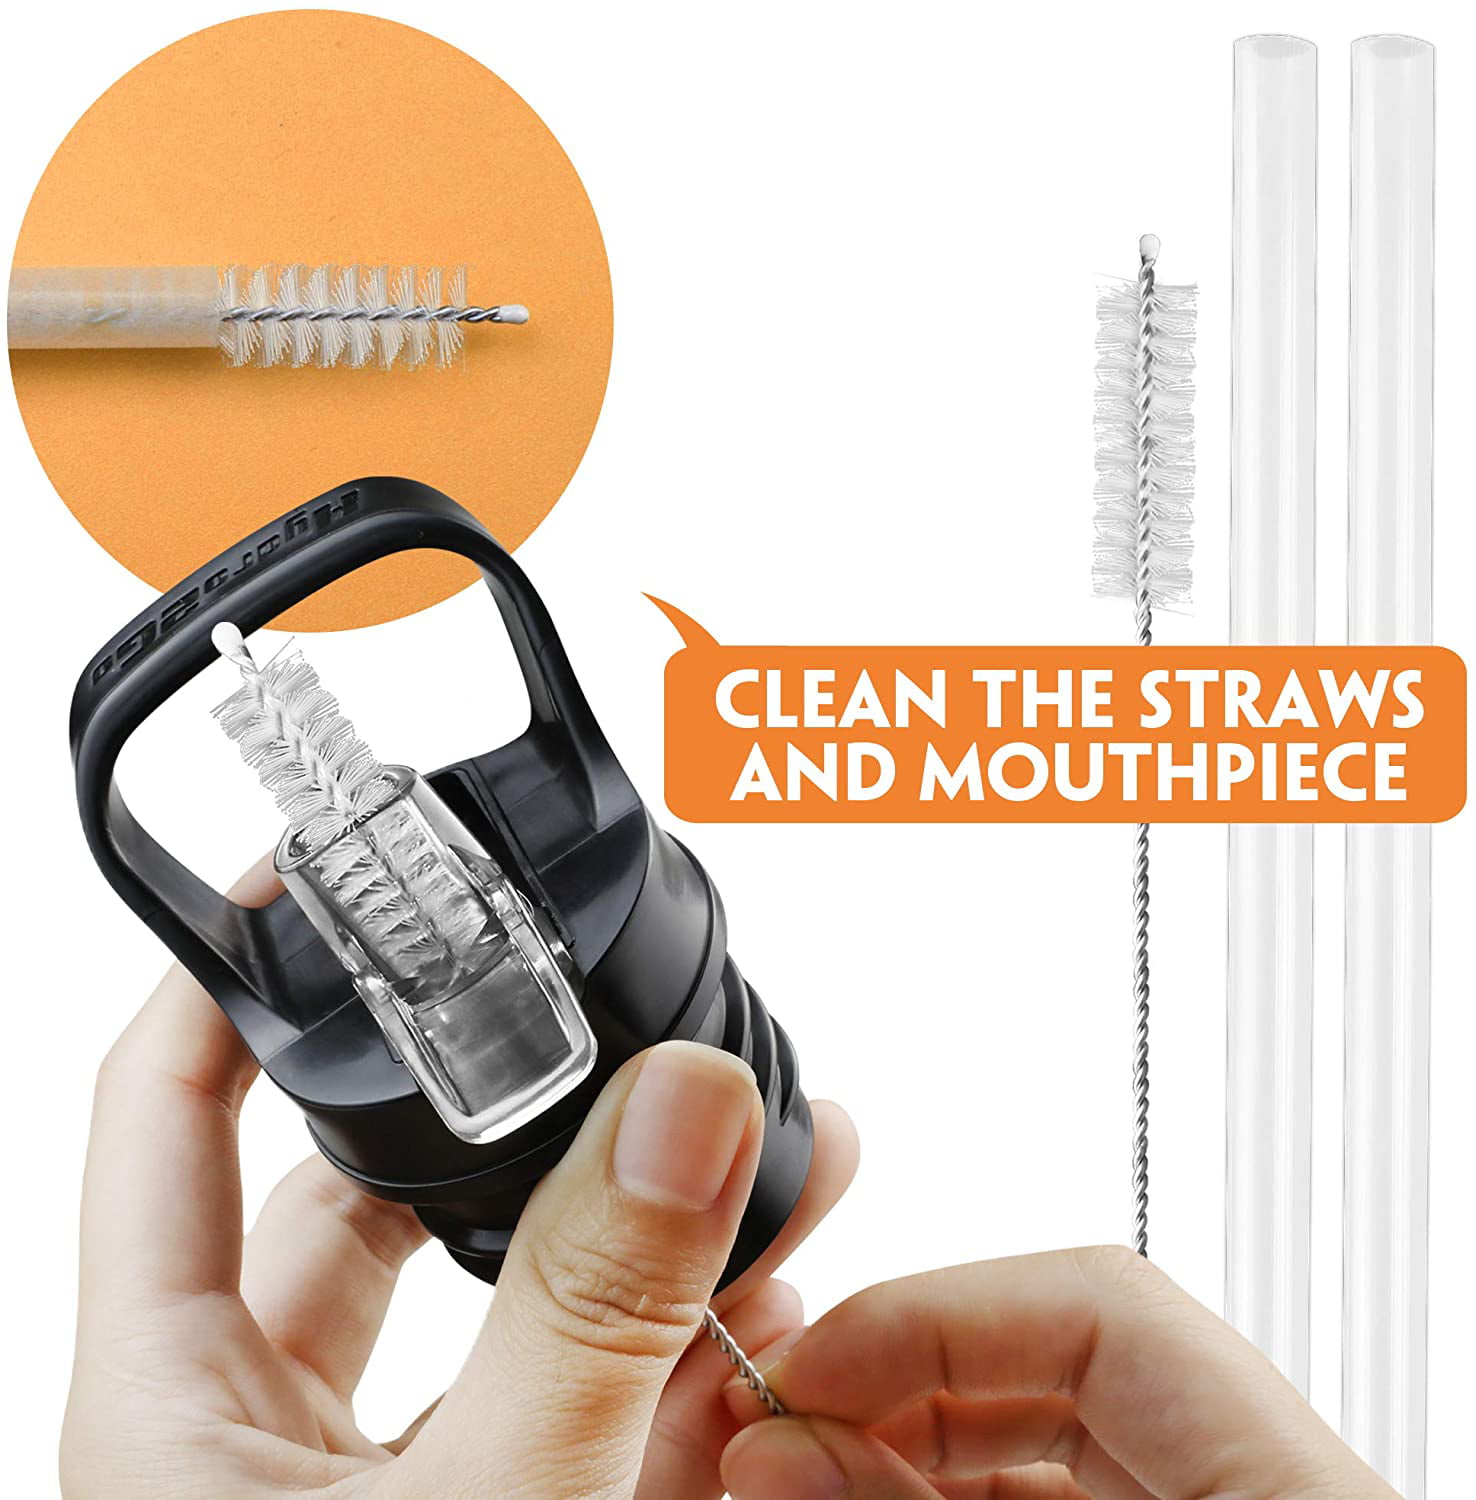 Replacement Plastic Straws | Fits Sierra Wide Mouth and Ridge Straw Lids